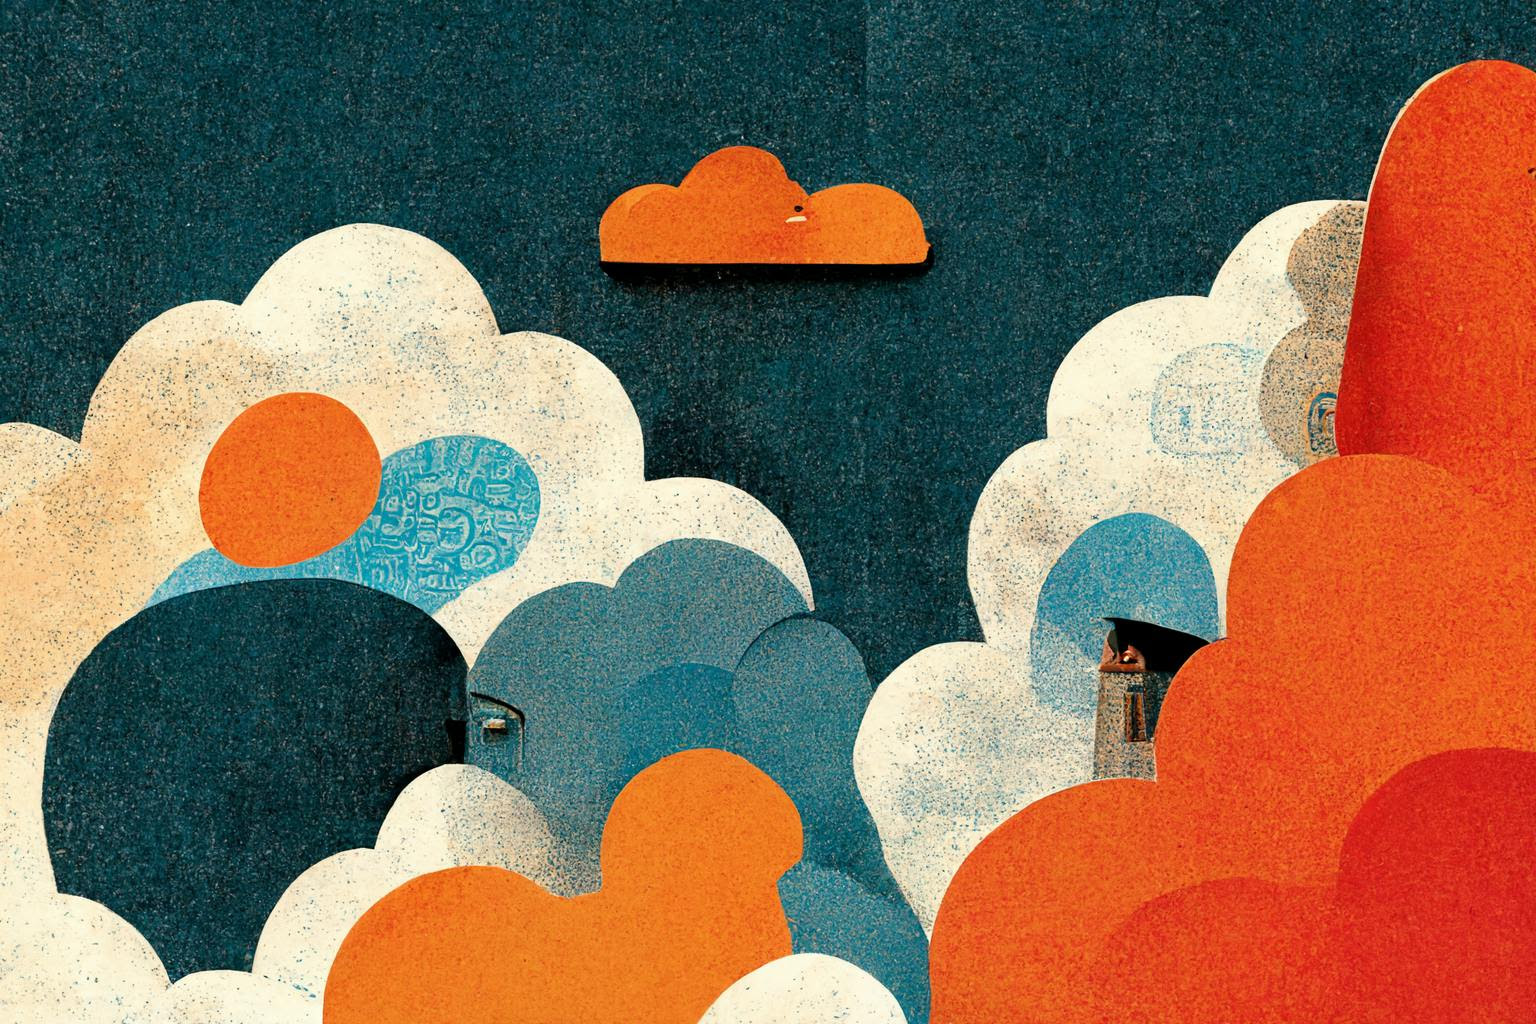 editorial illustration about curiosity, and questioning different doorways and clouds, playful possibilities, collage and pencil crayon, blues and orange palette, in the style of UKIOYO-E